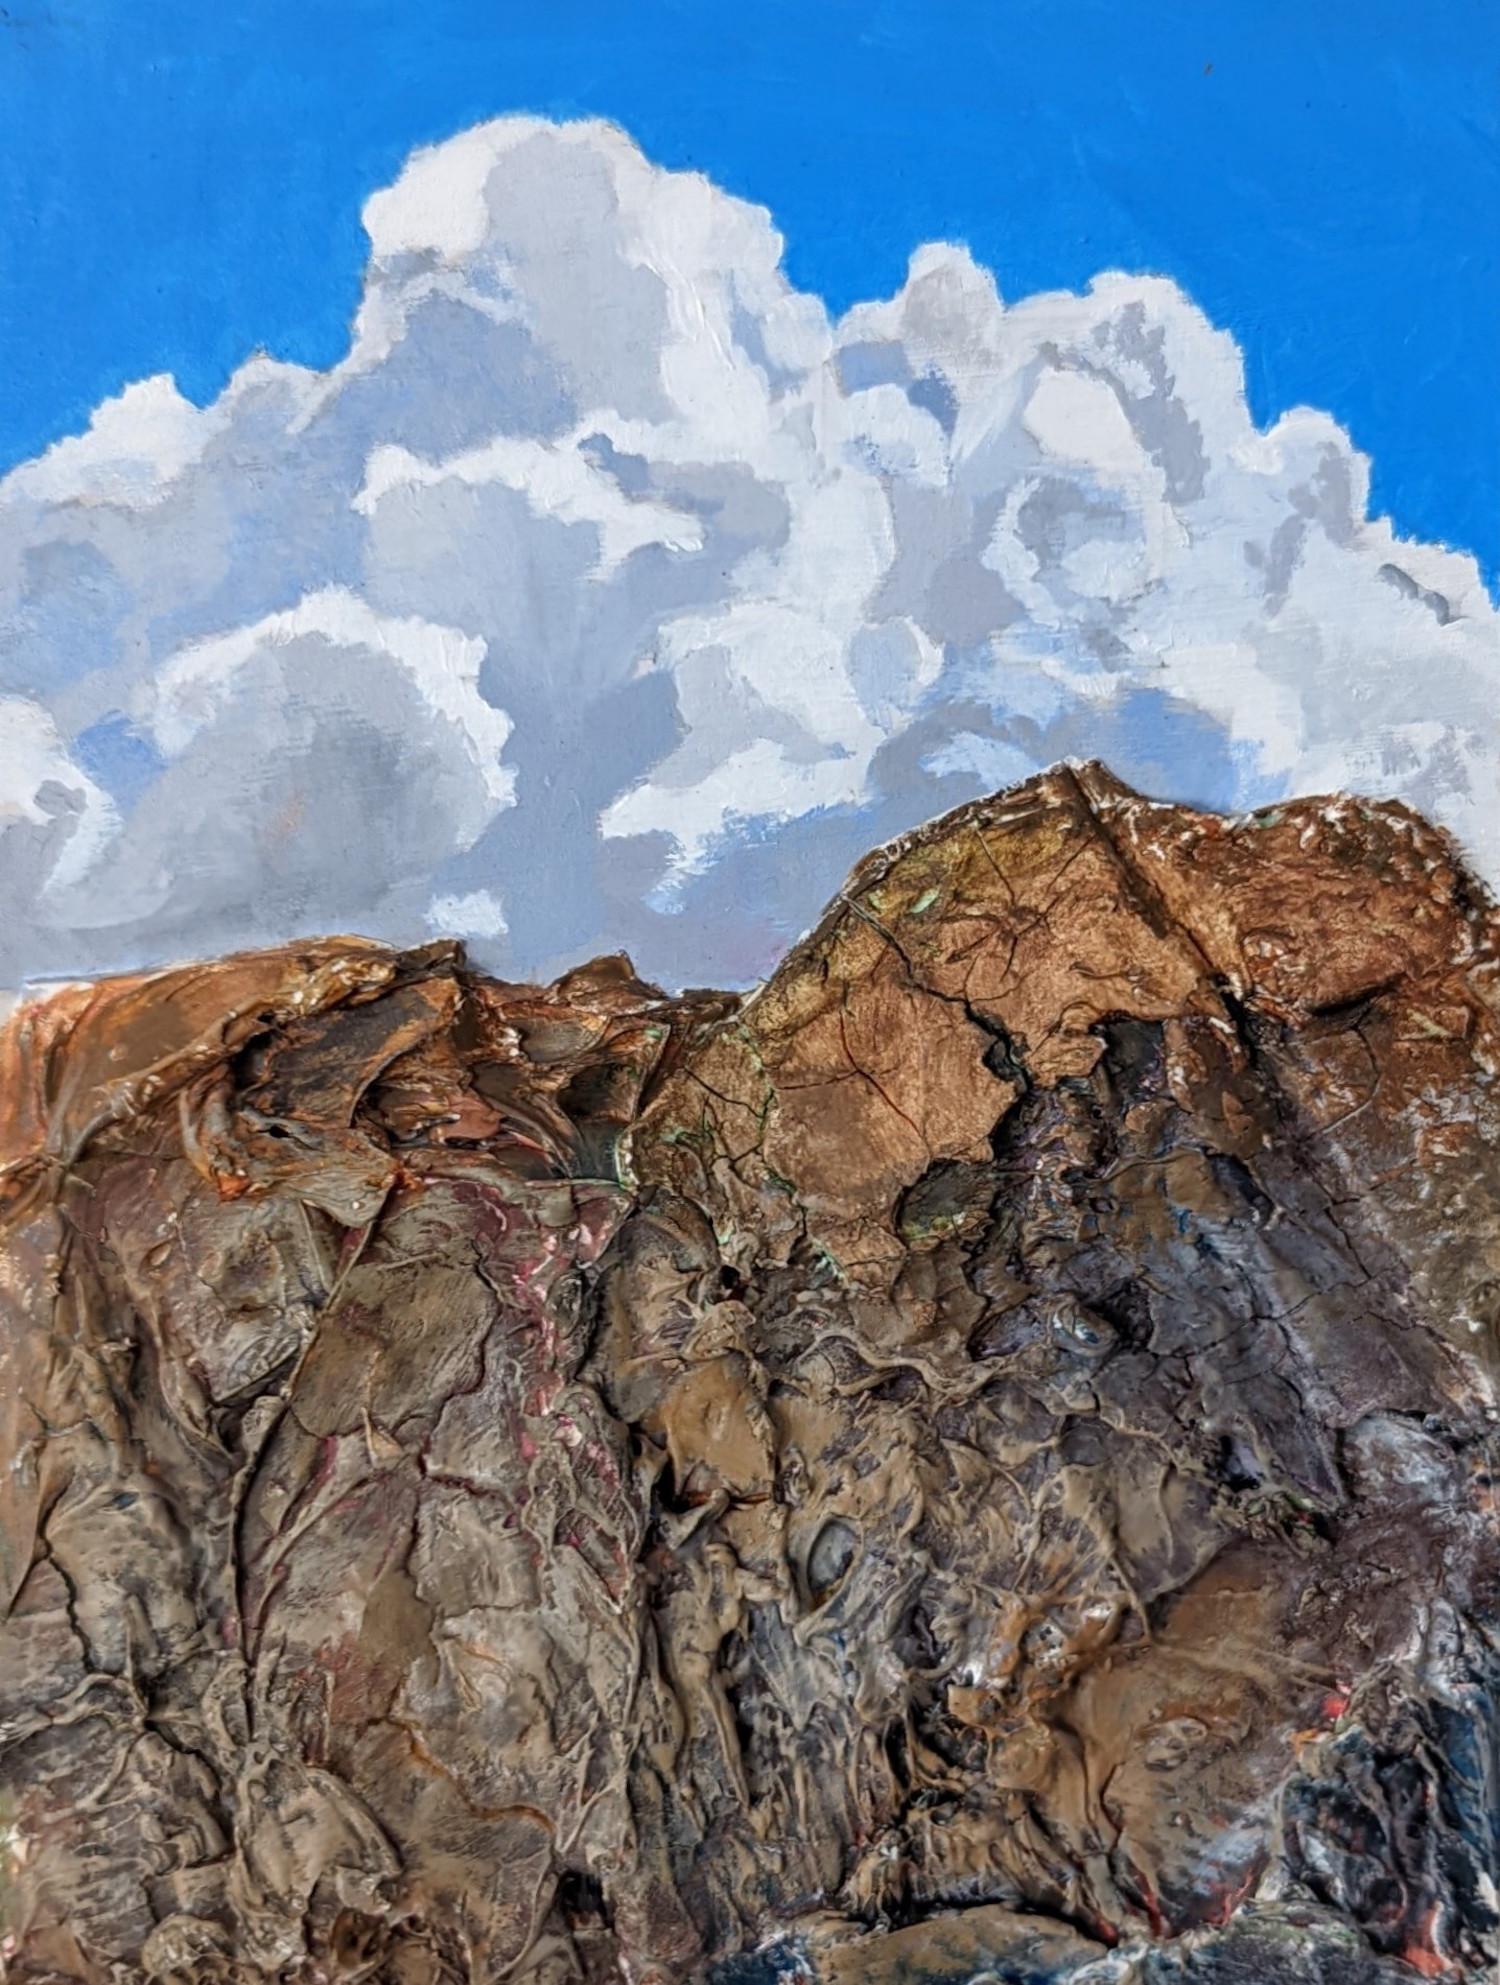 "The sky is bluer on the other side", acrylic, landscape, mountain, blue, brown - Painting by Frantz Lexy